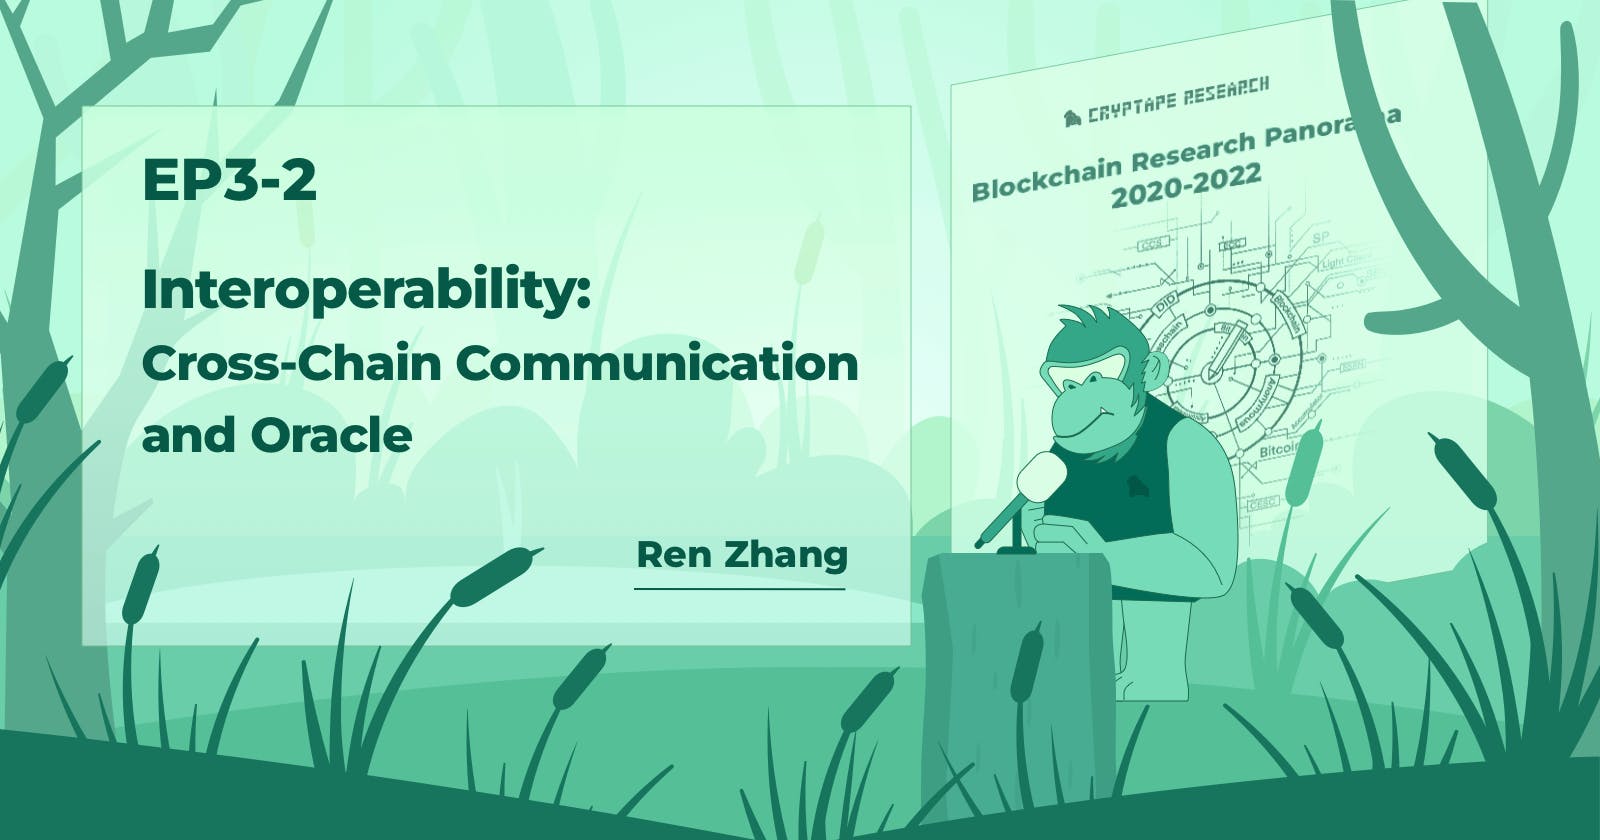 Interoperability: Cross-Chain Communication and Oracle